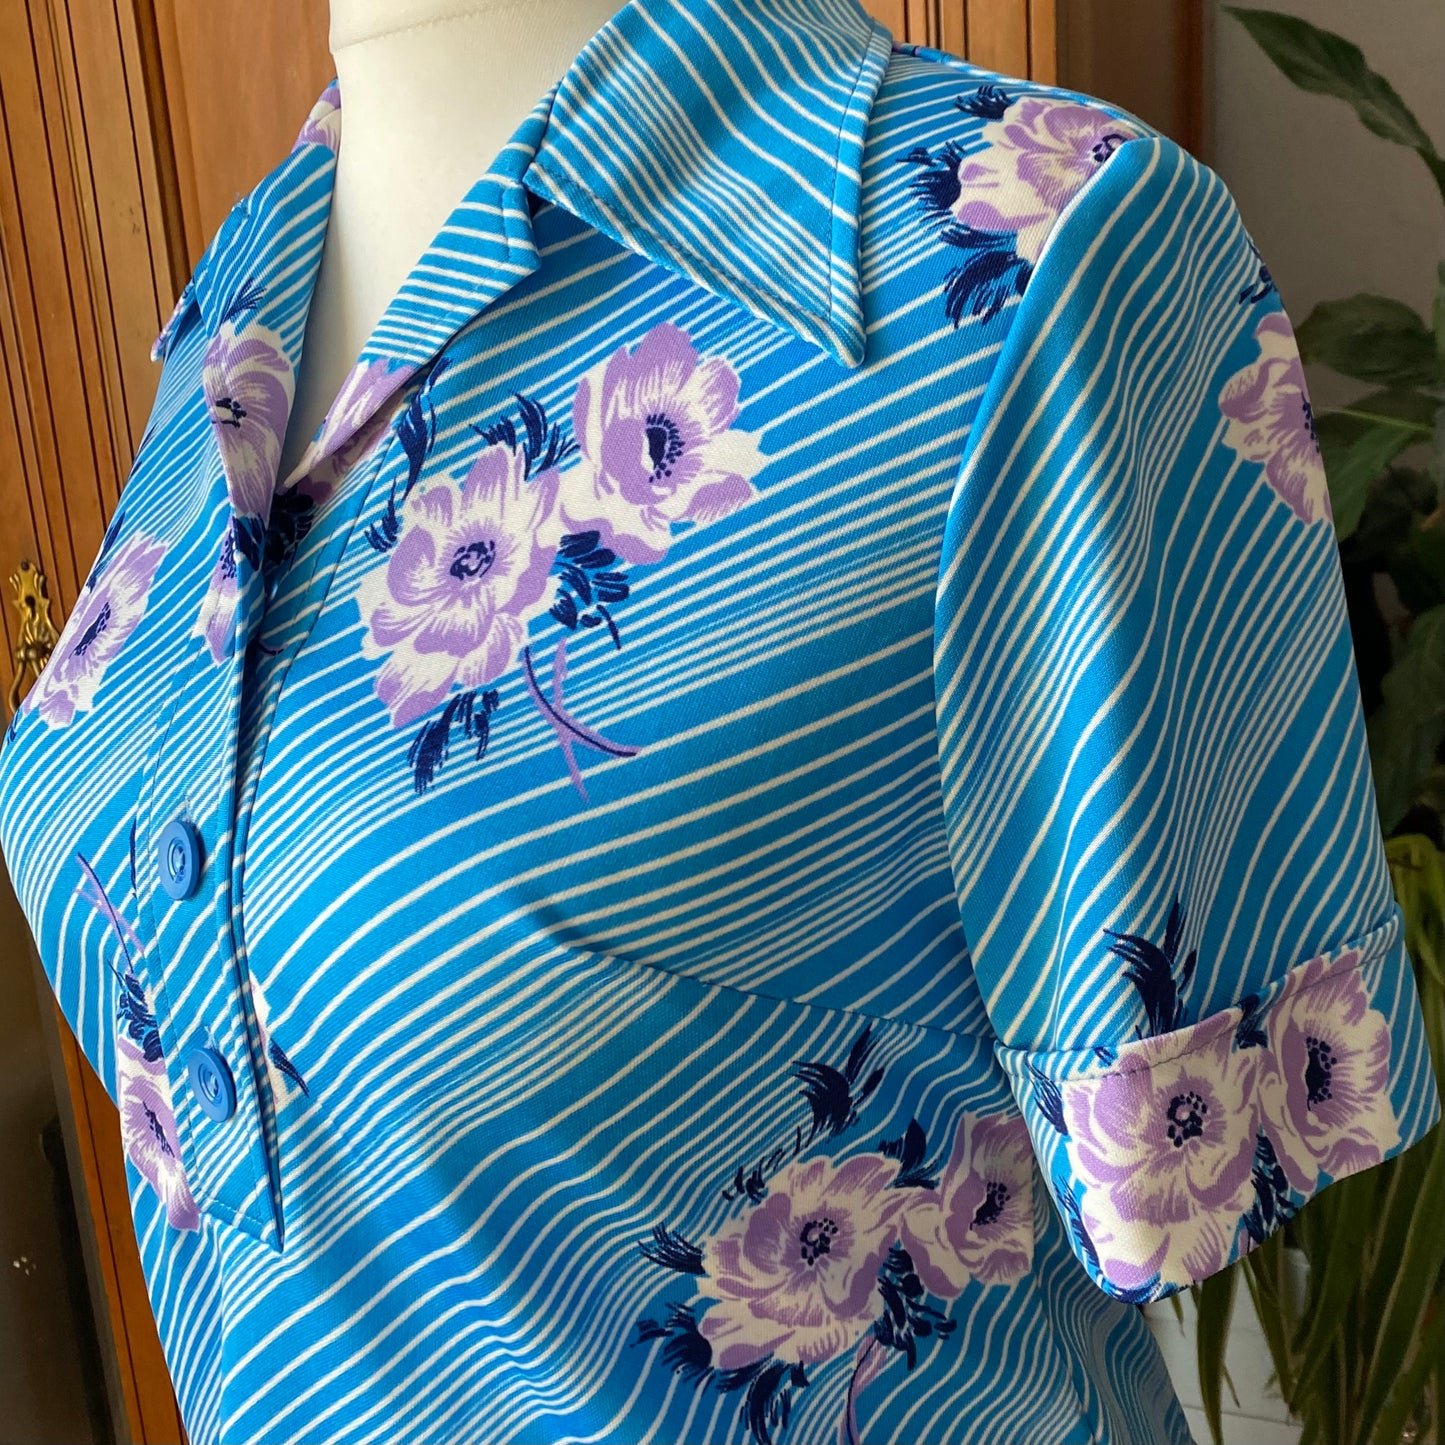 70s Hawaiian style blue and white short sleeved skirt suit /  co ord. Approx  UK size 14 -16